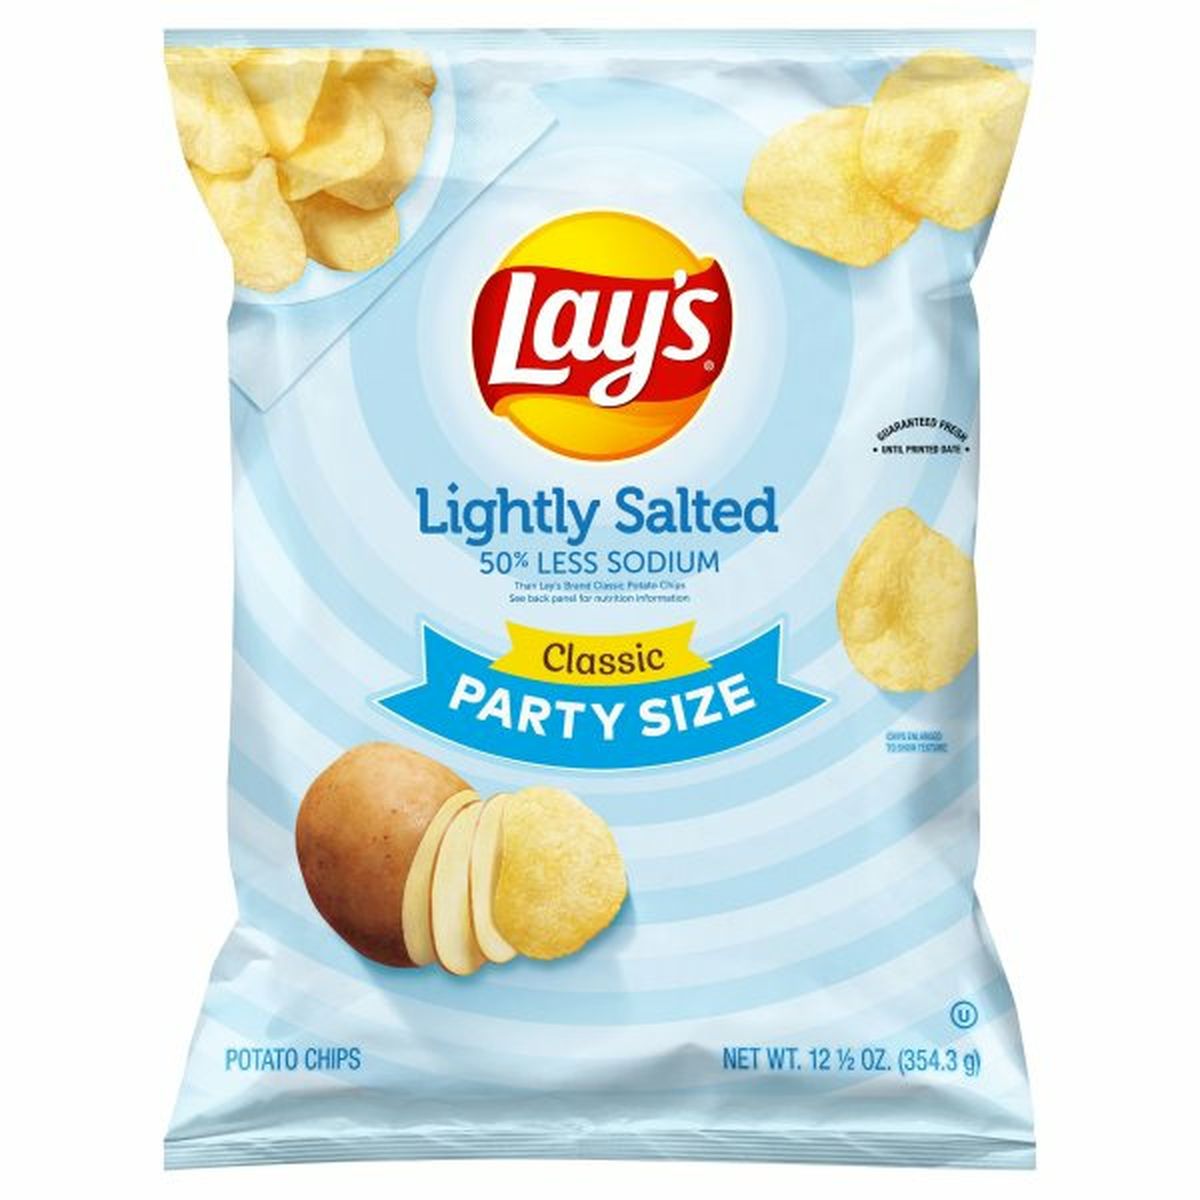 Calories in Lay's Potato Chips, Lightly Salted